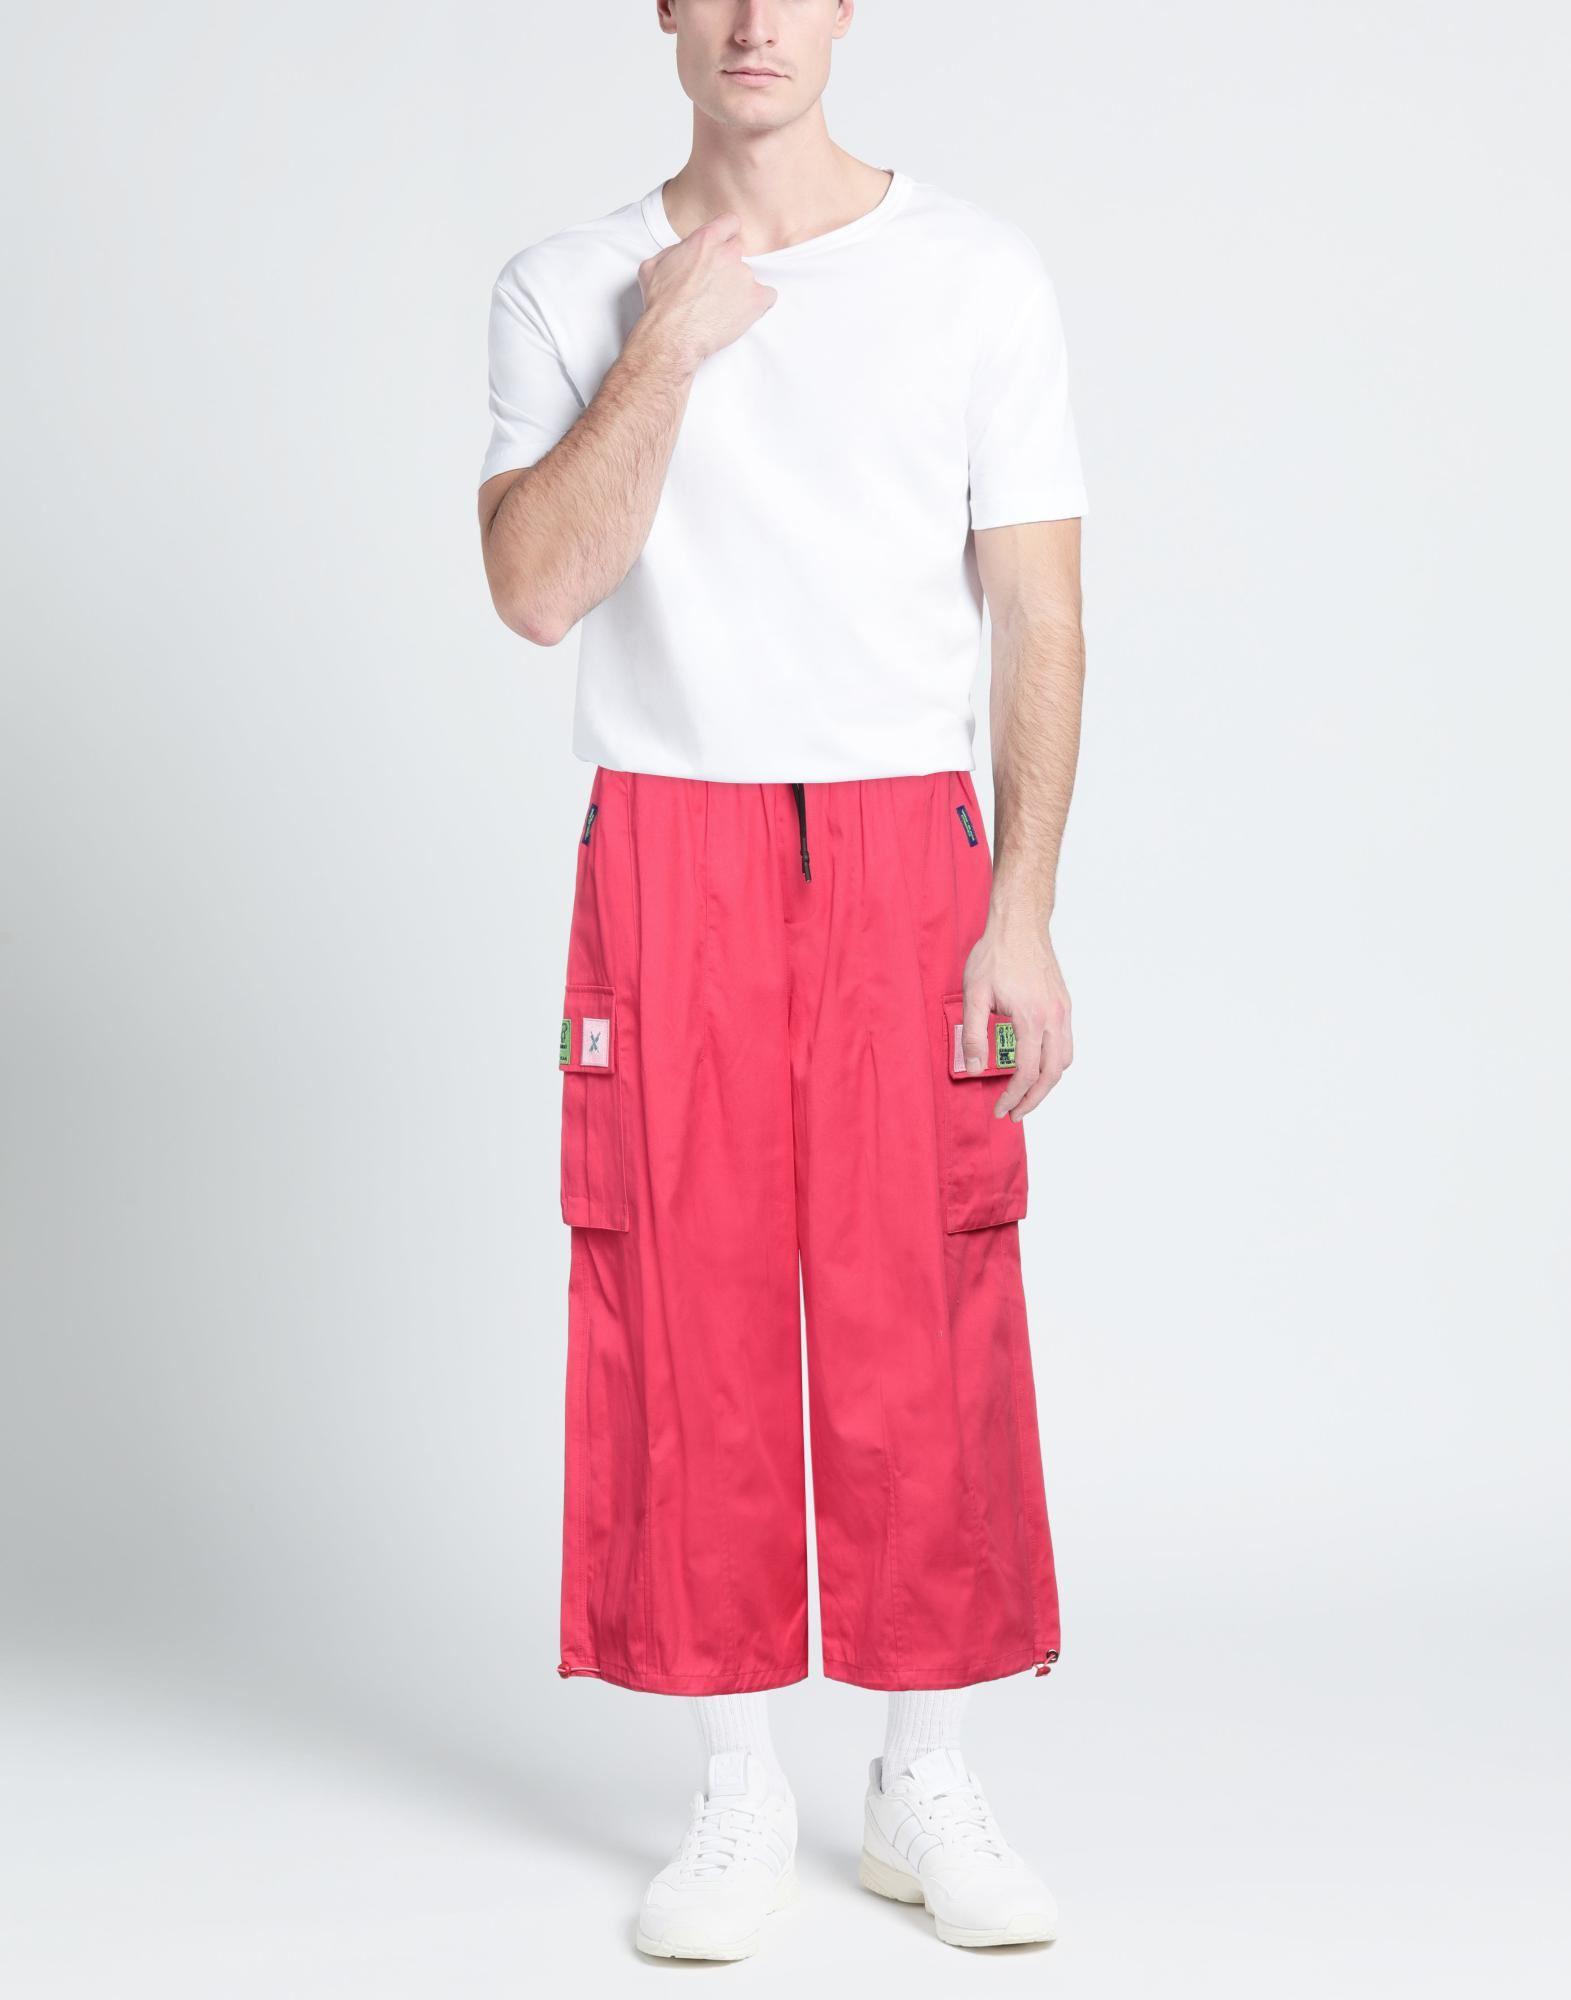 MWM - MOD WAVE MOVEMENT Pants in Pink for Men | Lyst